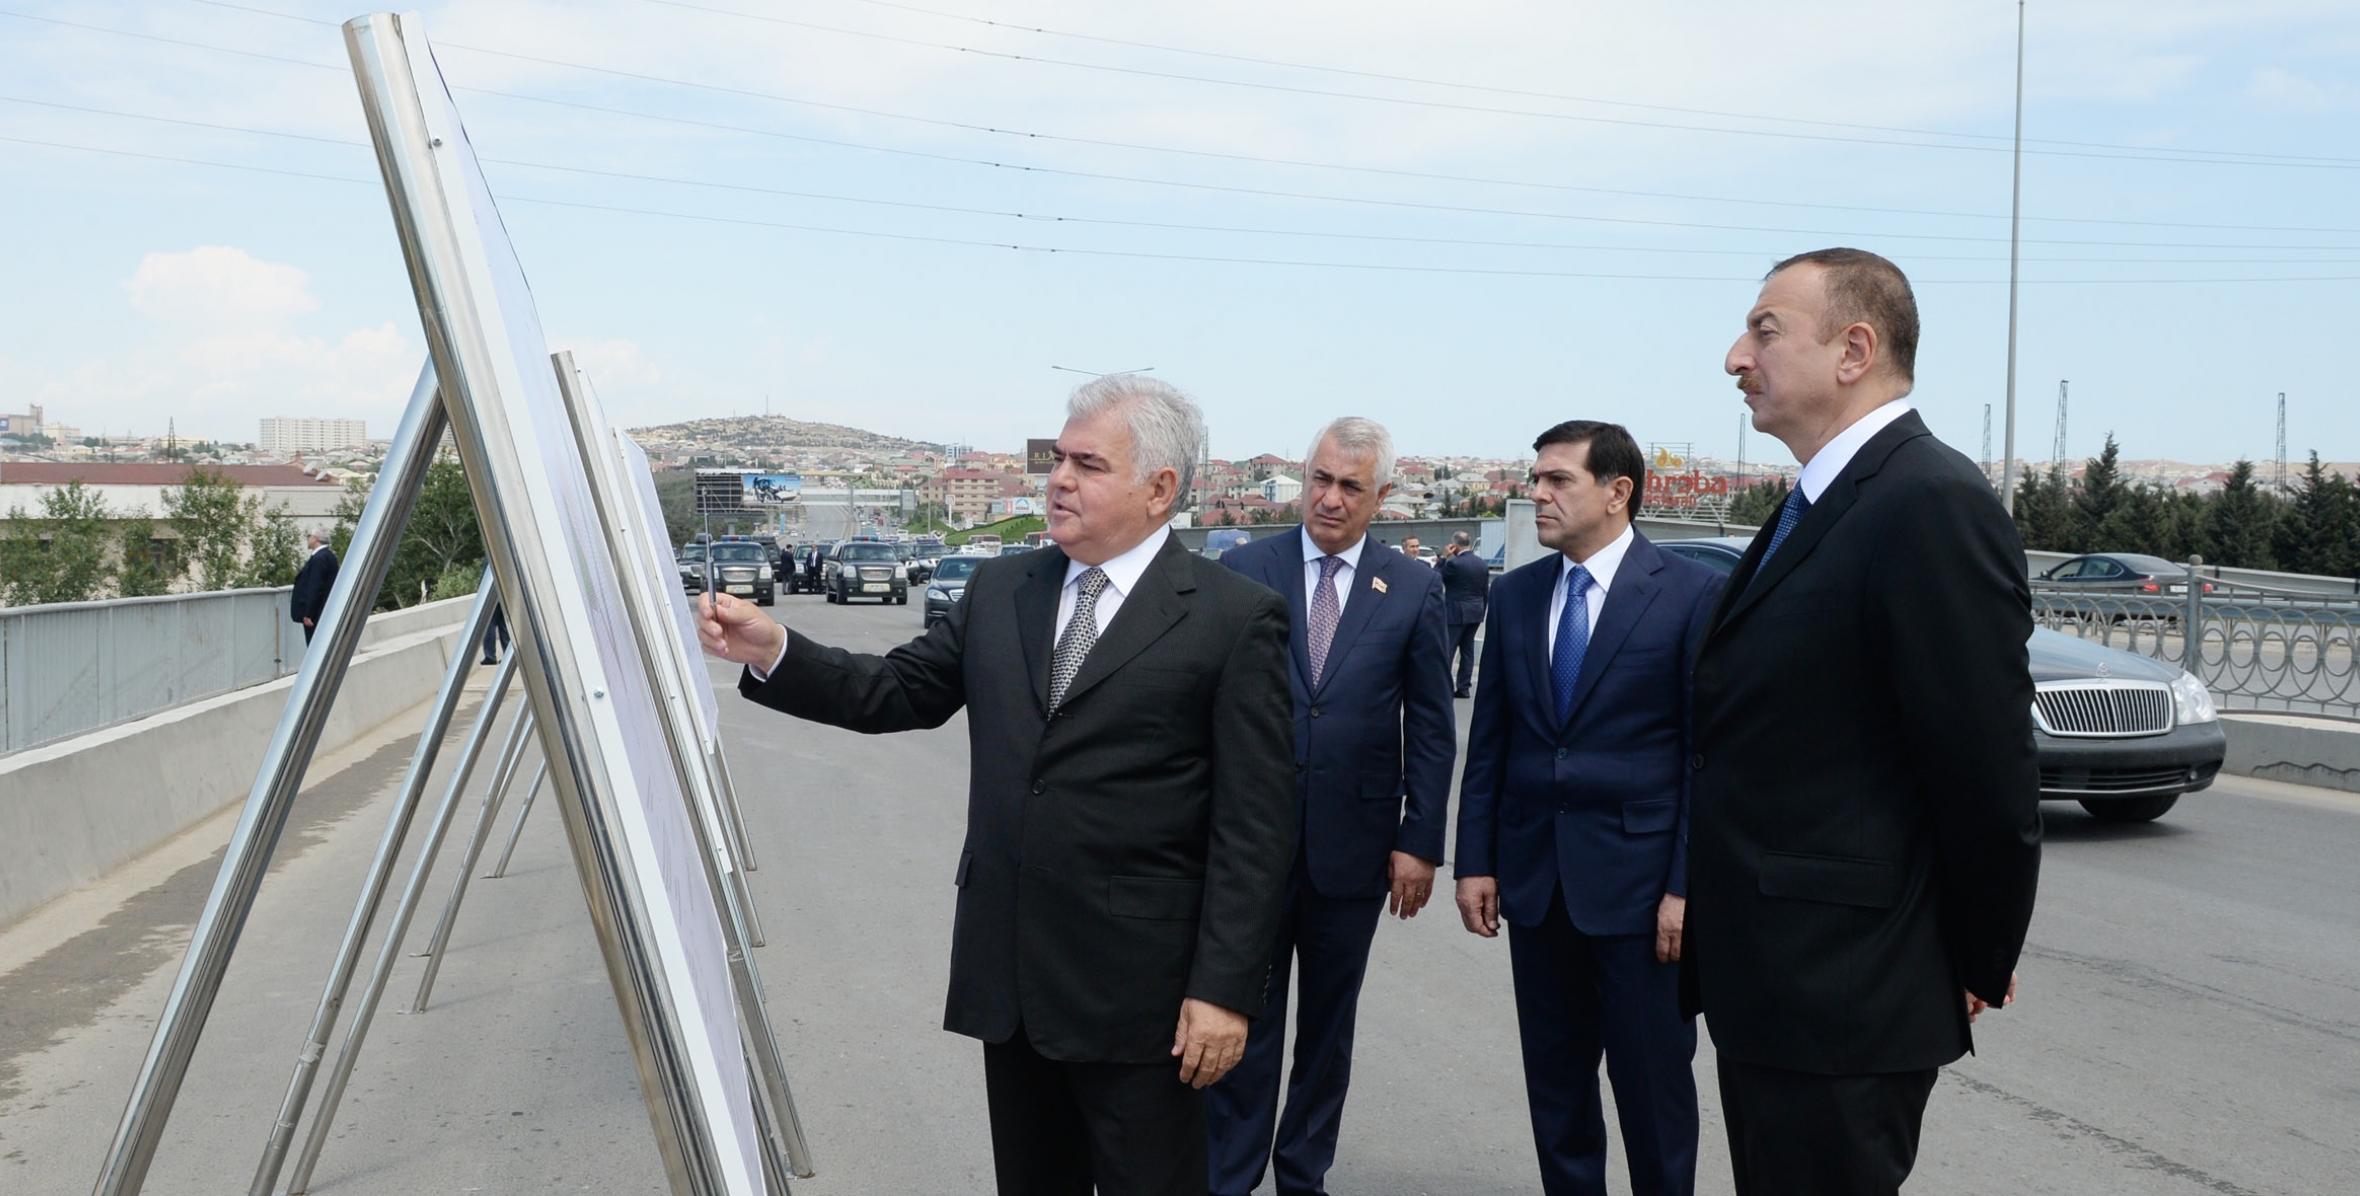 Ilham Aliyev attended the opening of the overhauled Tagiyev-Sahil highway